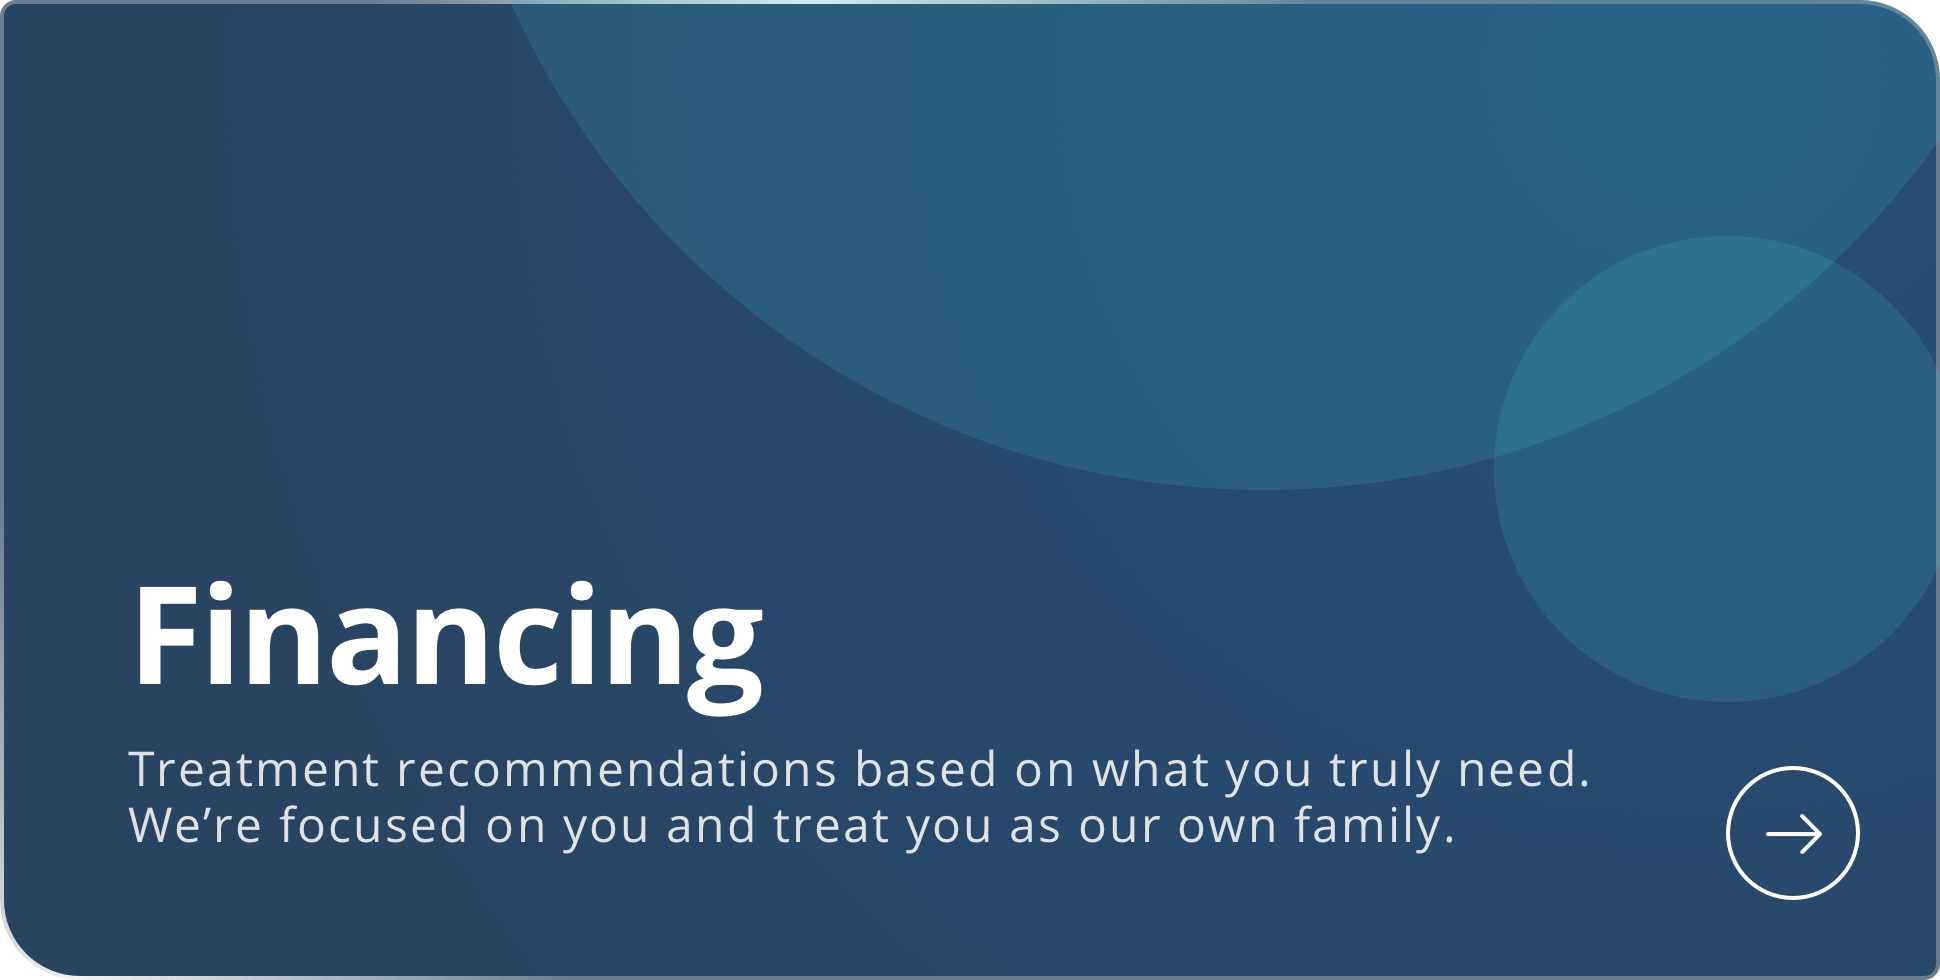 Financing. Treatment recommendations based on what you truly need. We’re focused on you and treat you as we would our own family. Learn more about financing.